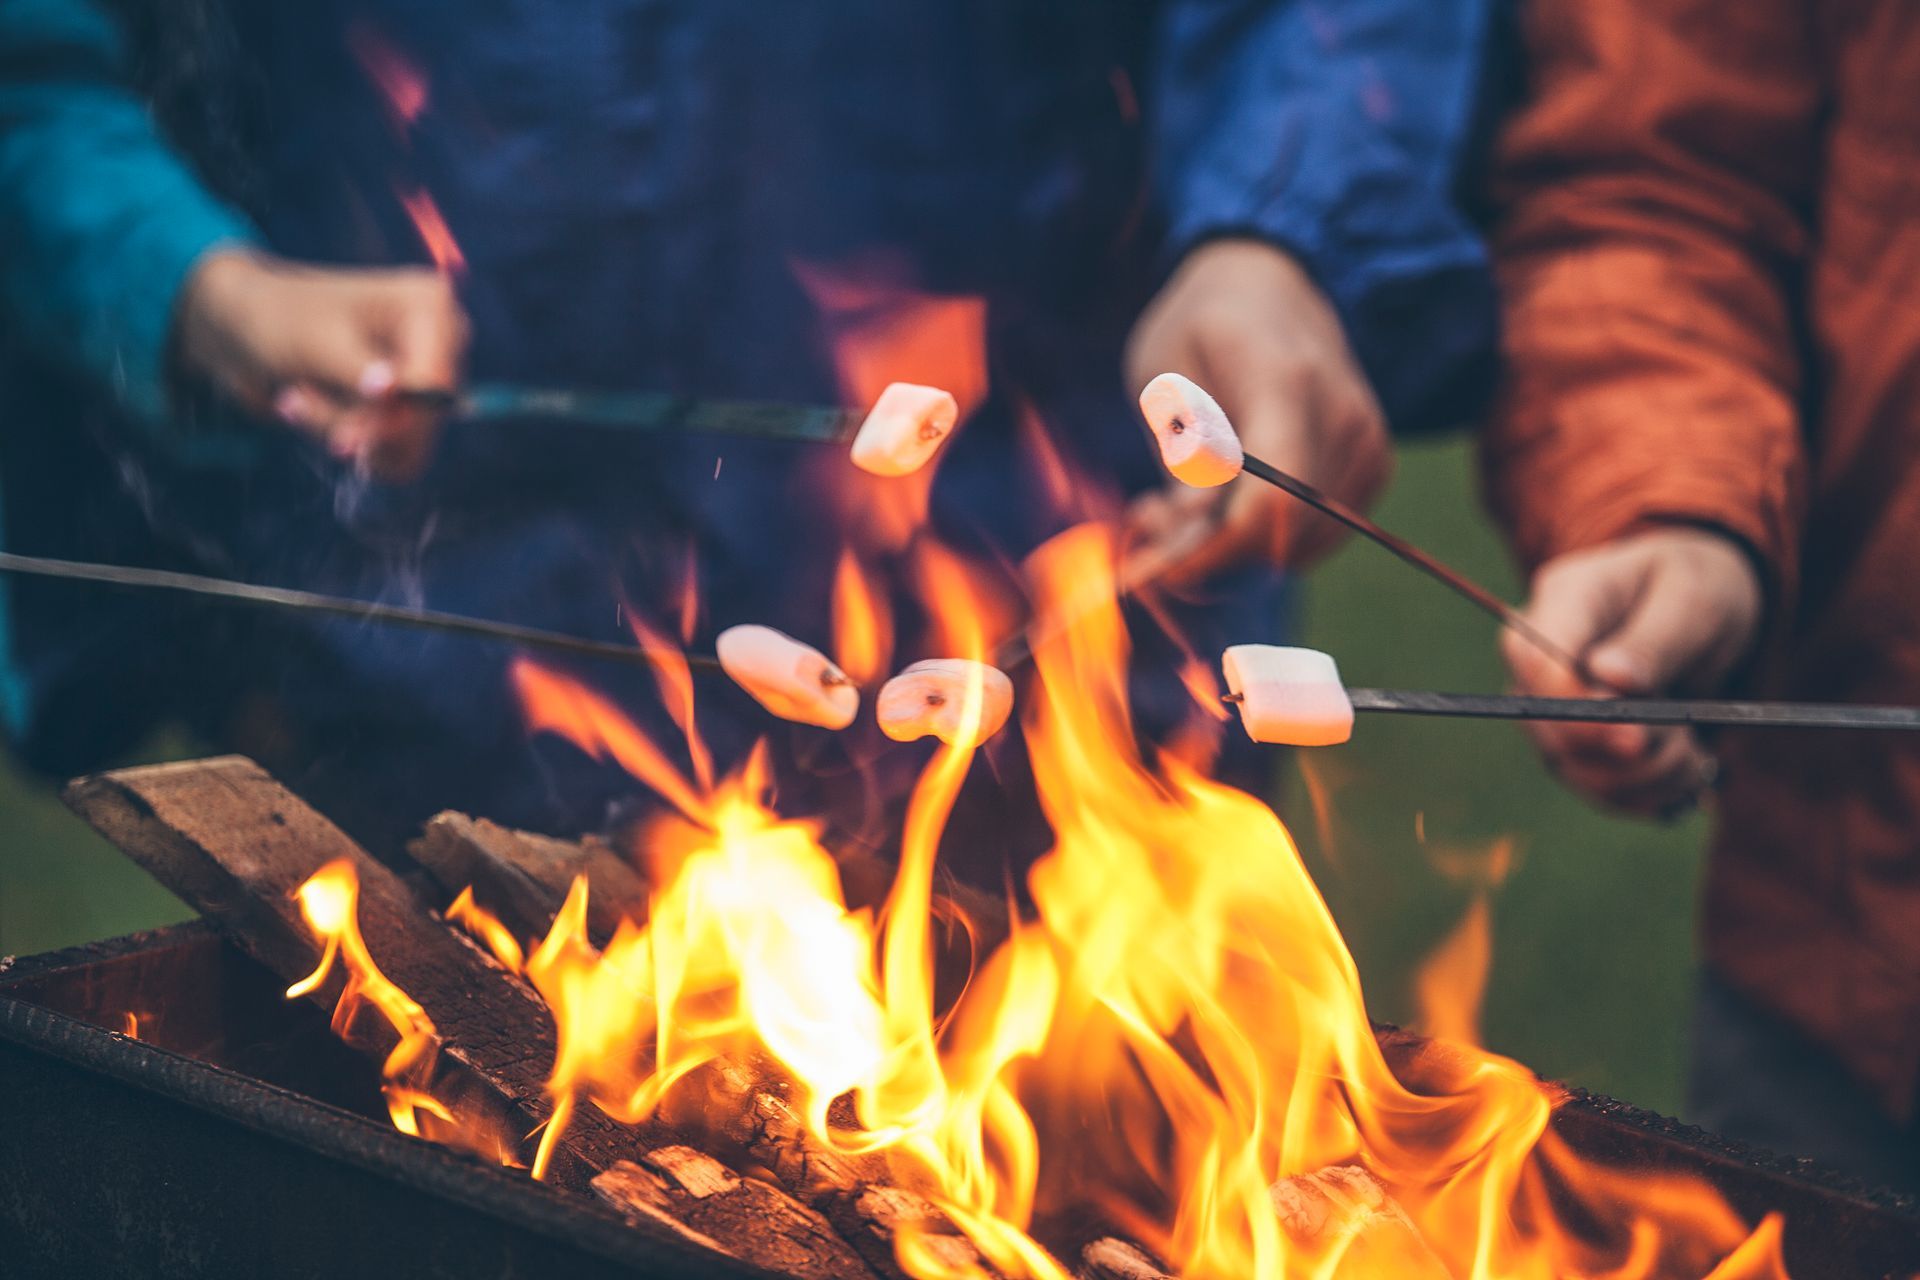 A group of people are roasting marshmallows over a fire.